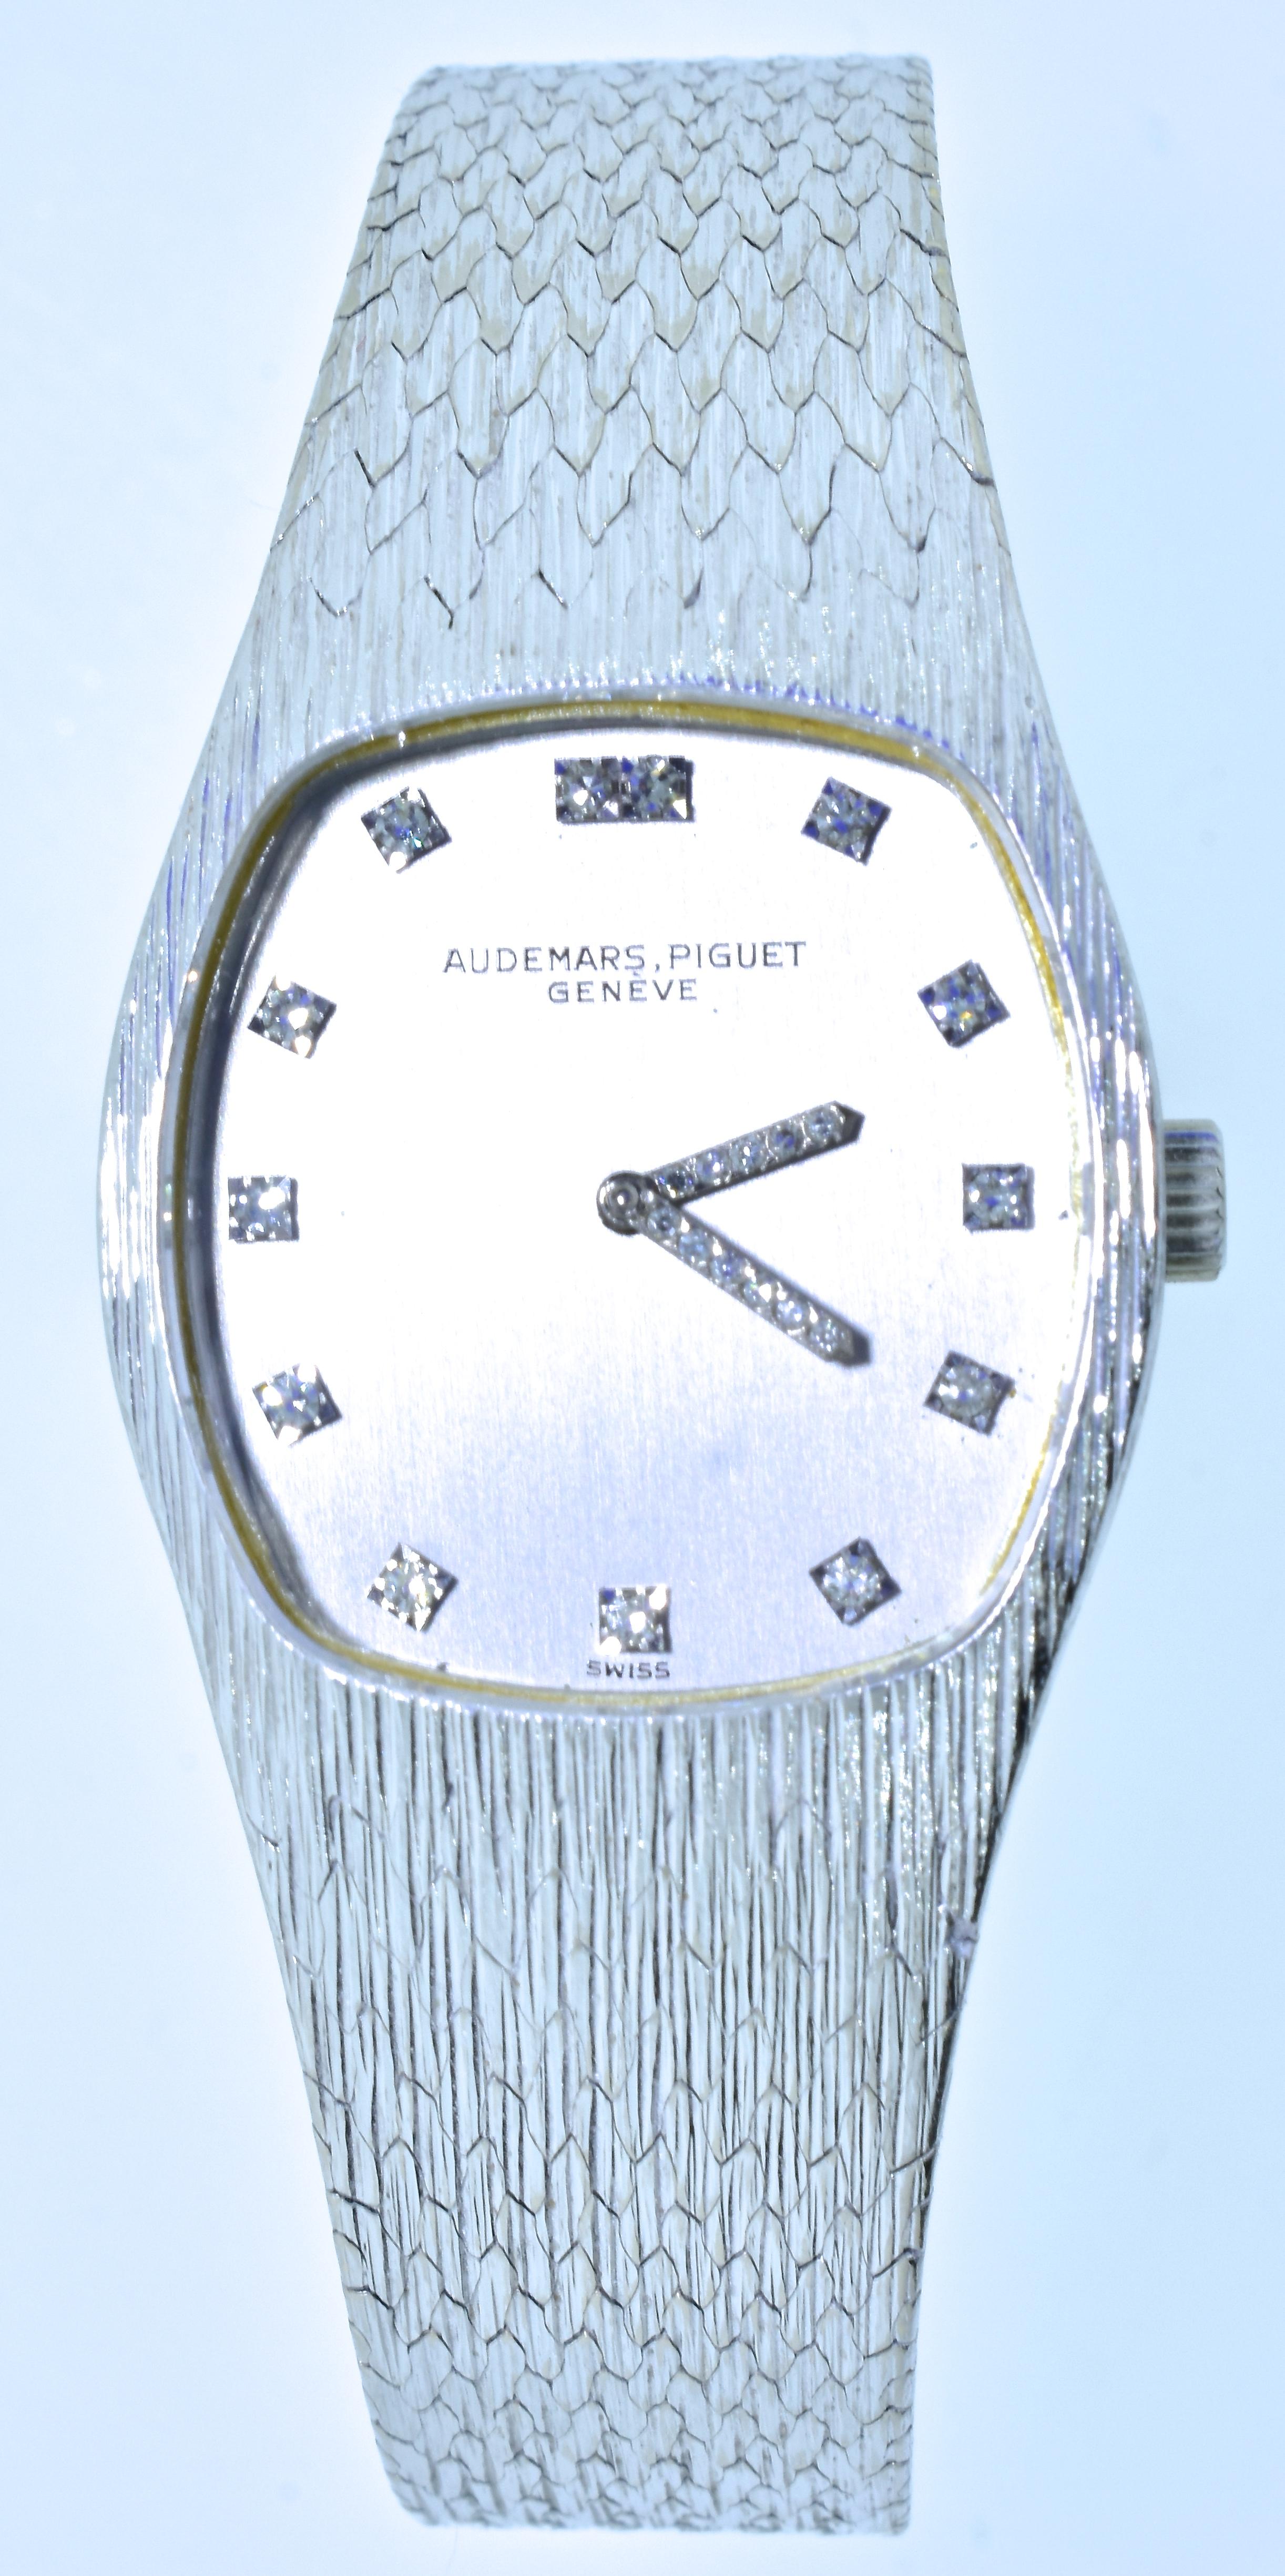 Audemars Piguet diamond and 18K white gold wristwatch, mechanical (manual wind), high jeweled movement with crystal dial, textured original band and diamond markers and diamond hands - all original.  In excellent condition, signed on the movement,